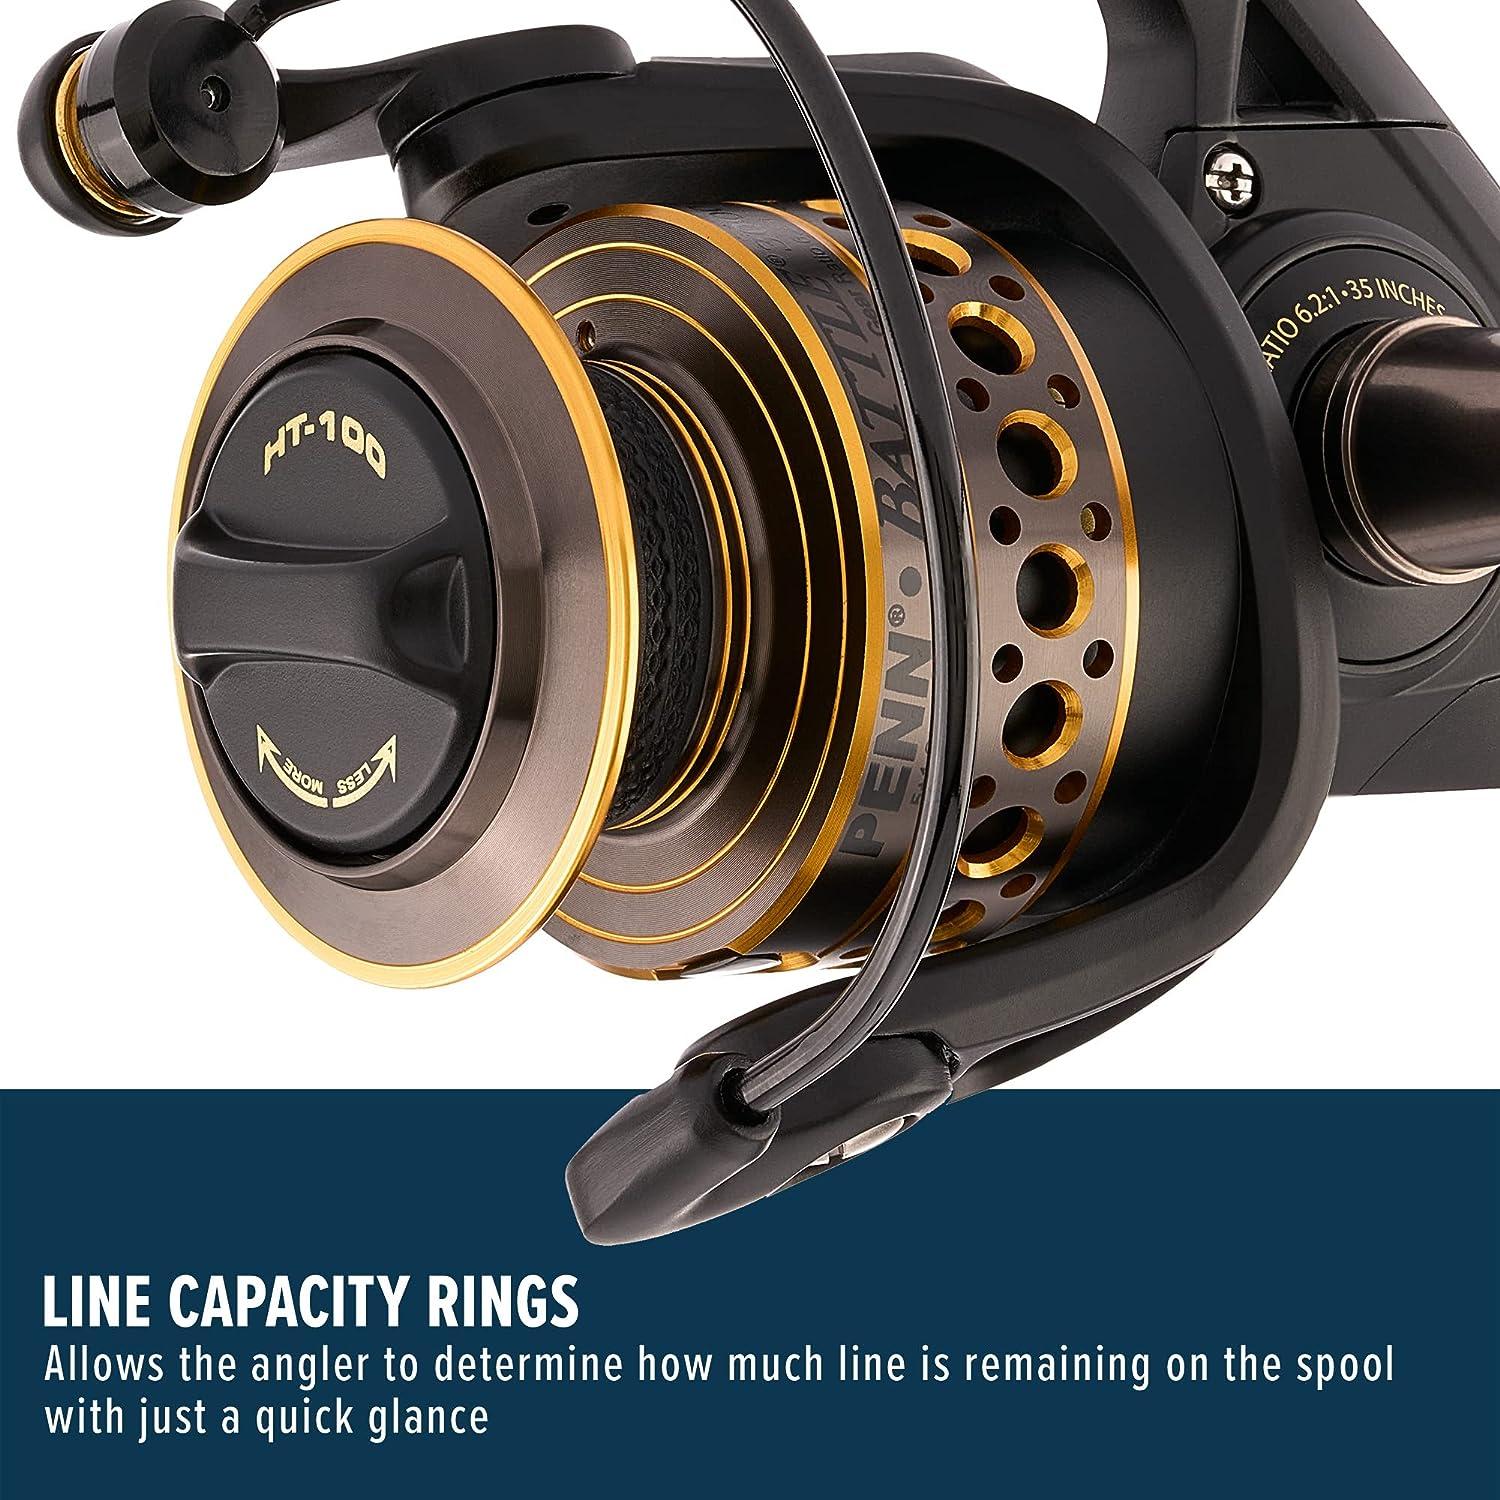 Penn Battle II 6000 Fishing Reel - How to take apart, service and